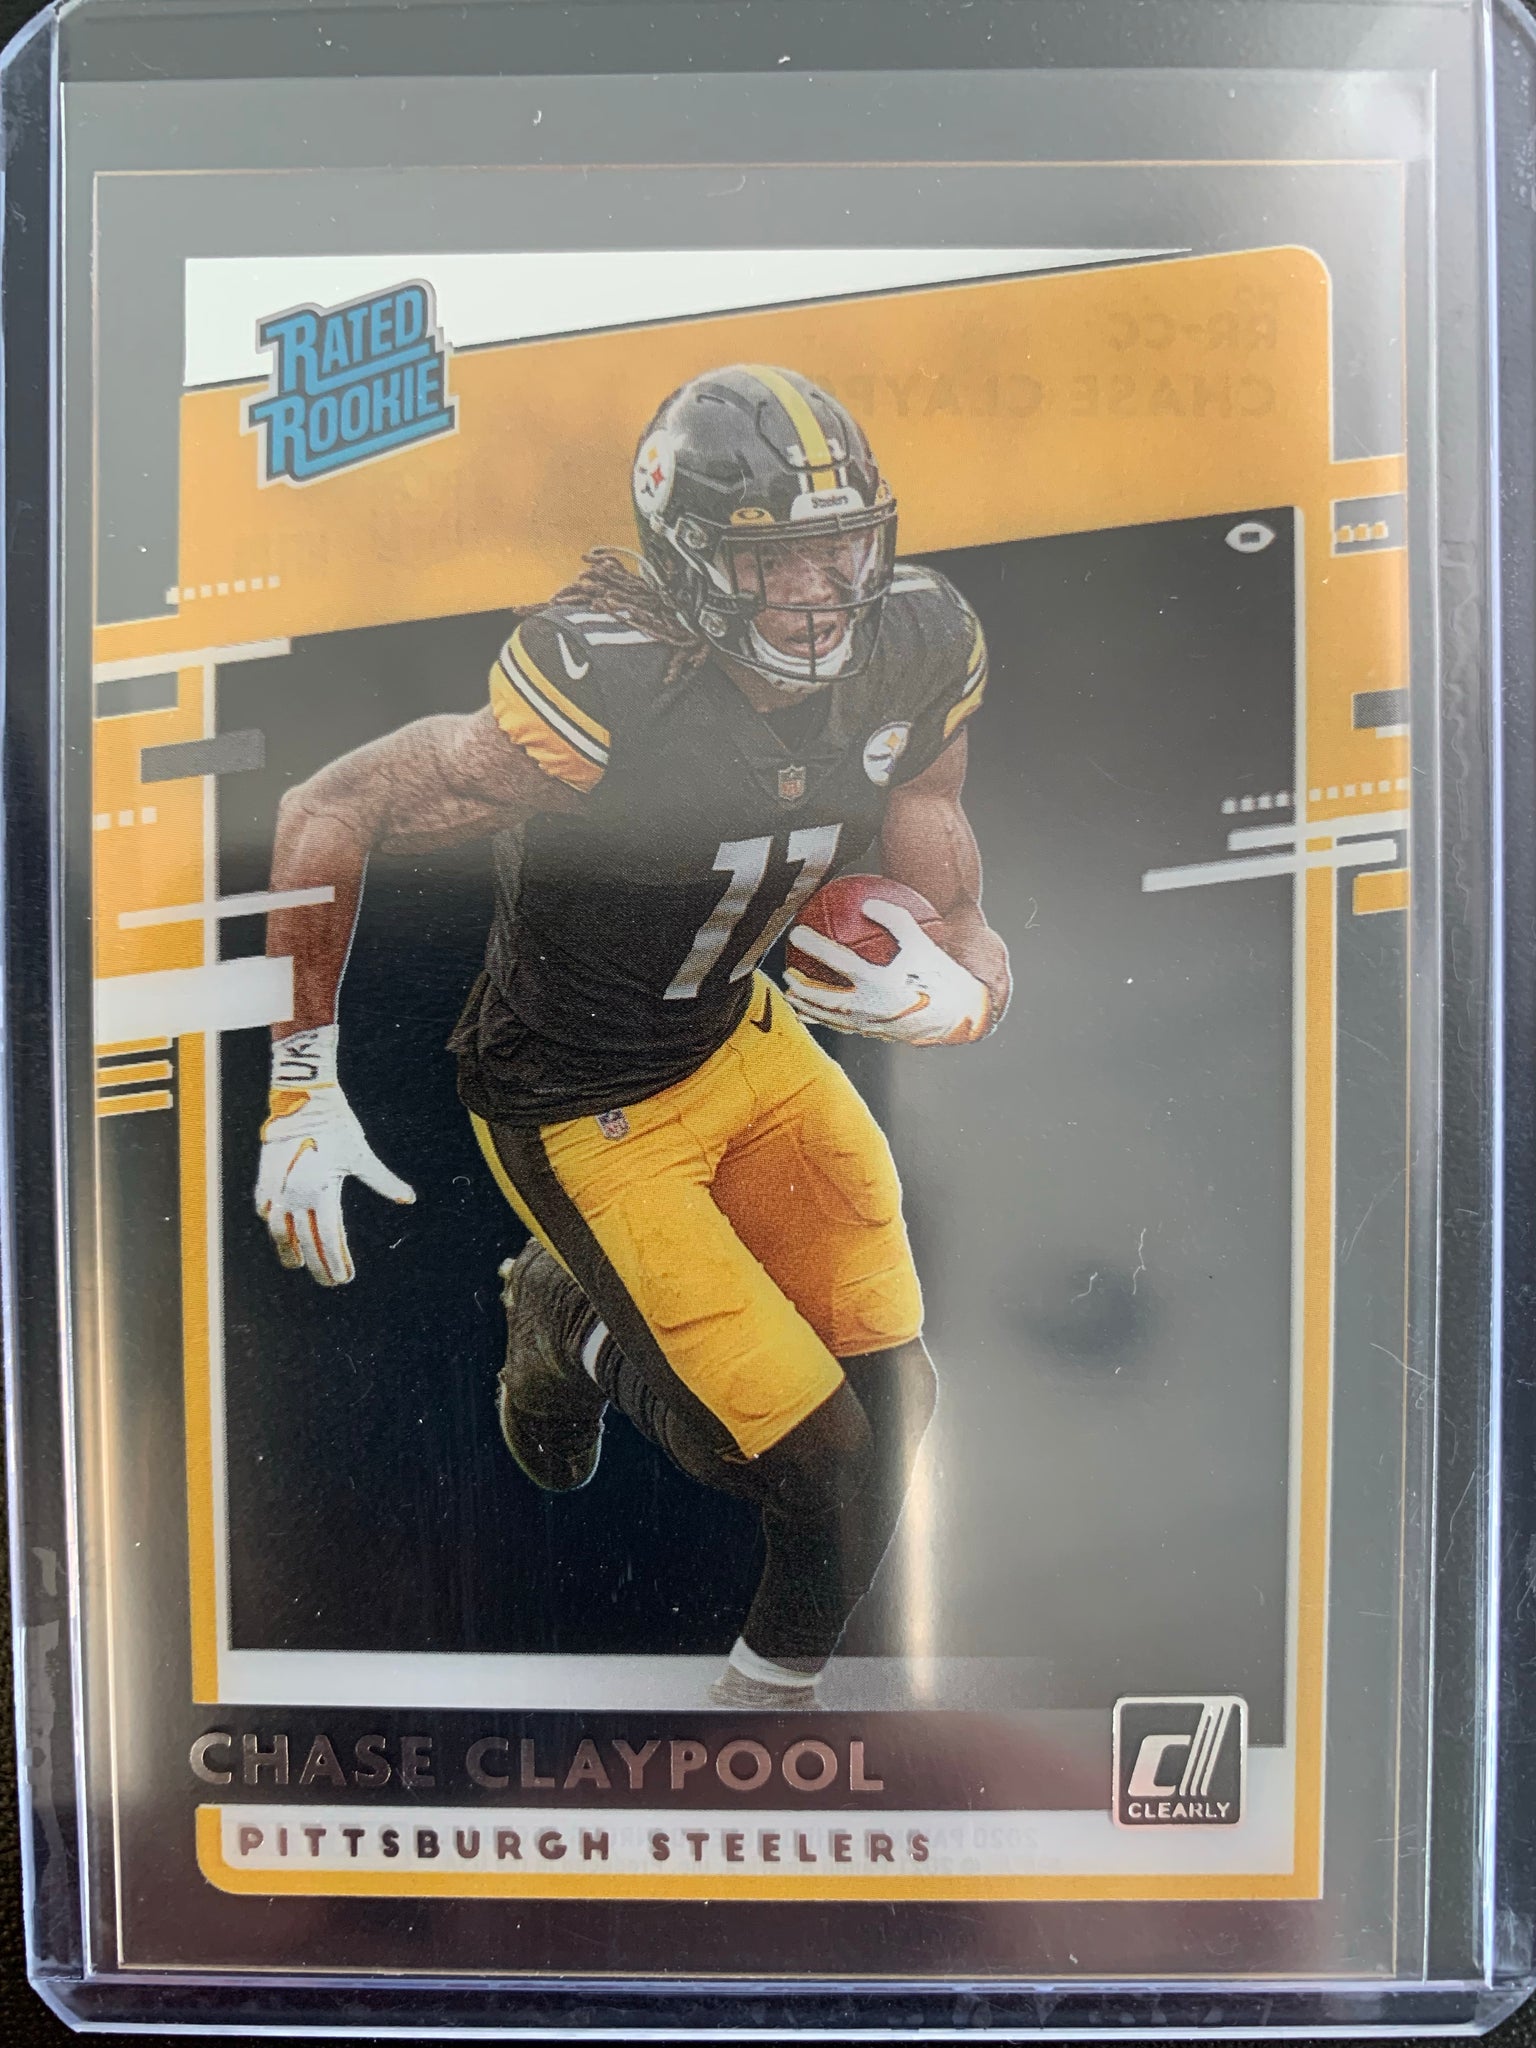 2020 PANINI CHRONICLES DONRUSS FOOTBALL #RR-CC PITTSBURGH STEELERS - CHASE CLAYPOOL CLEARLY DONRUSS RATED ROOKIE CARD